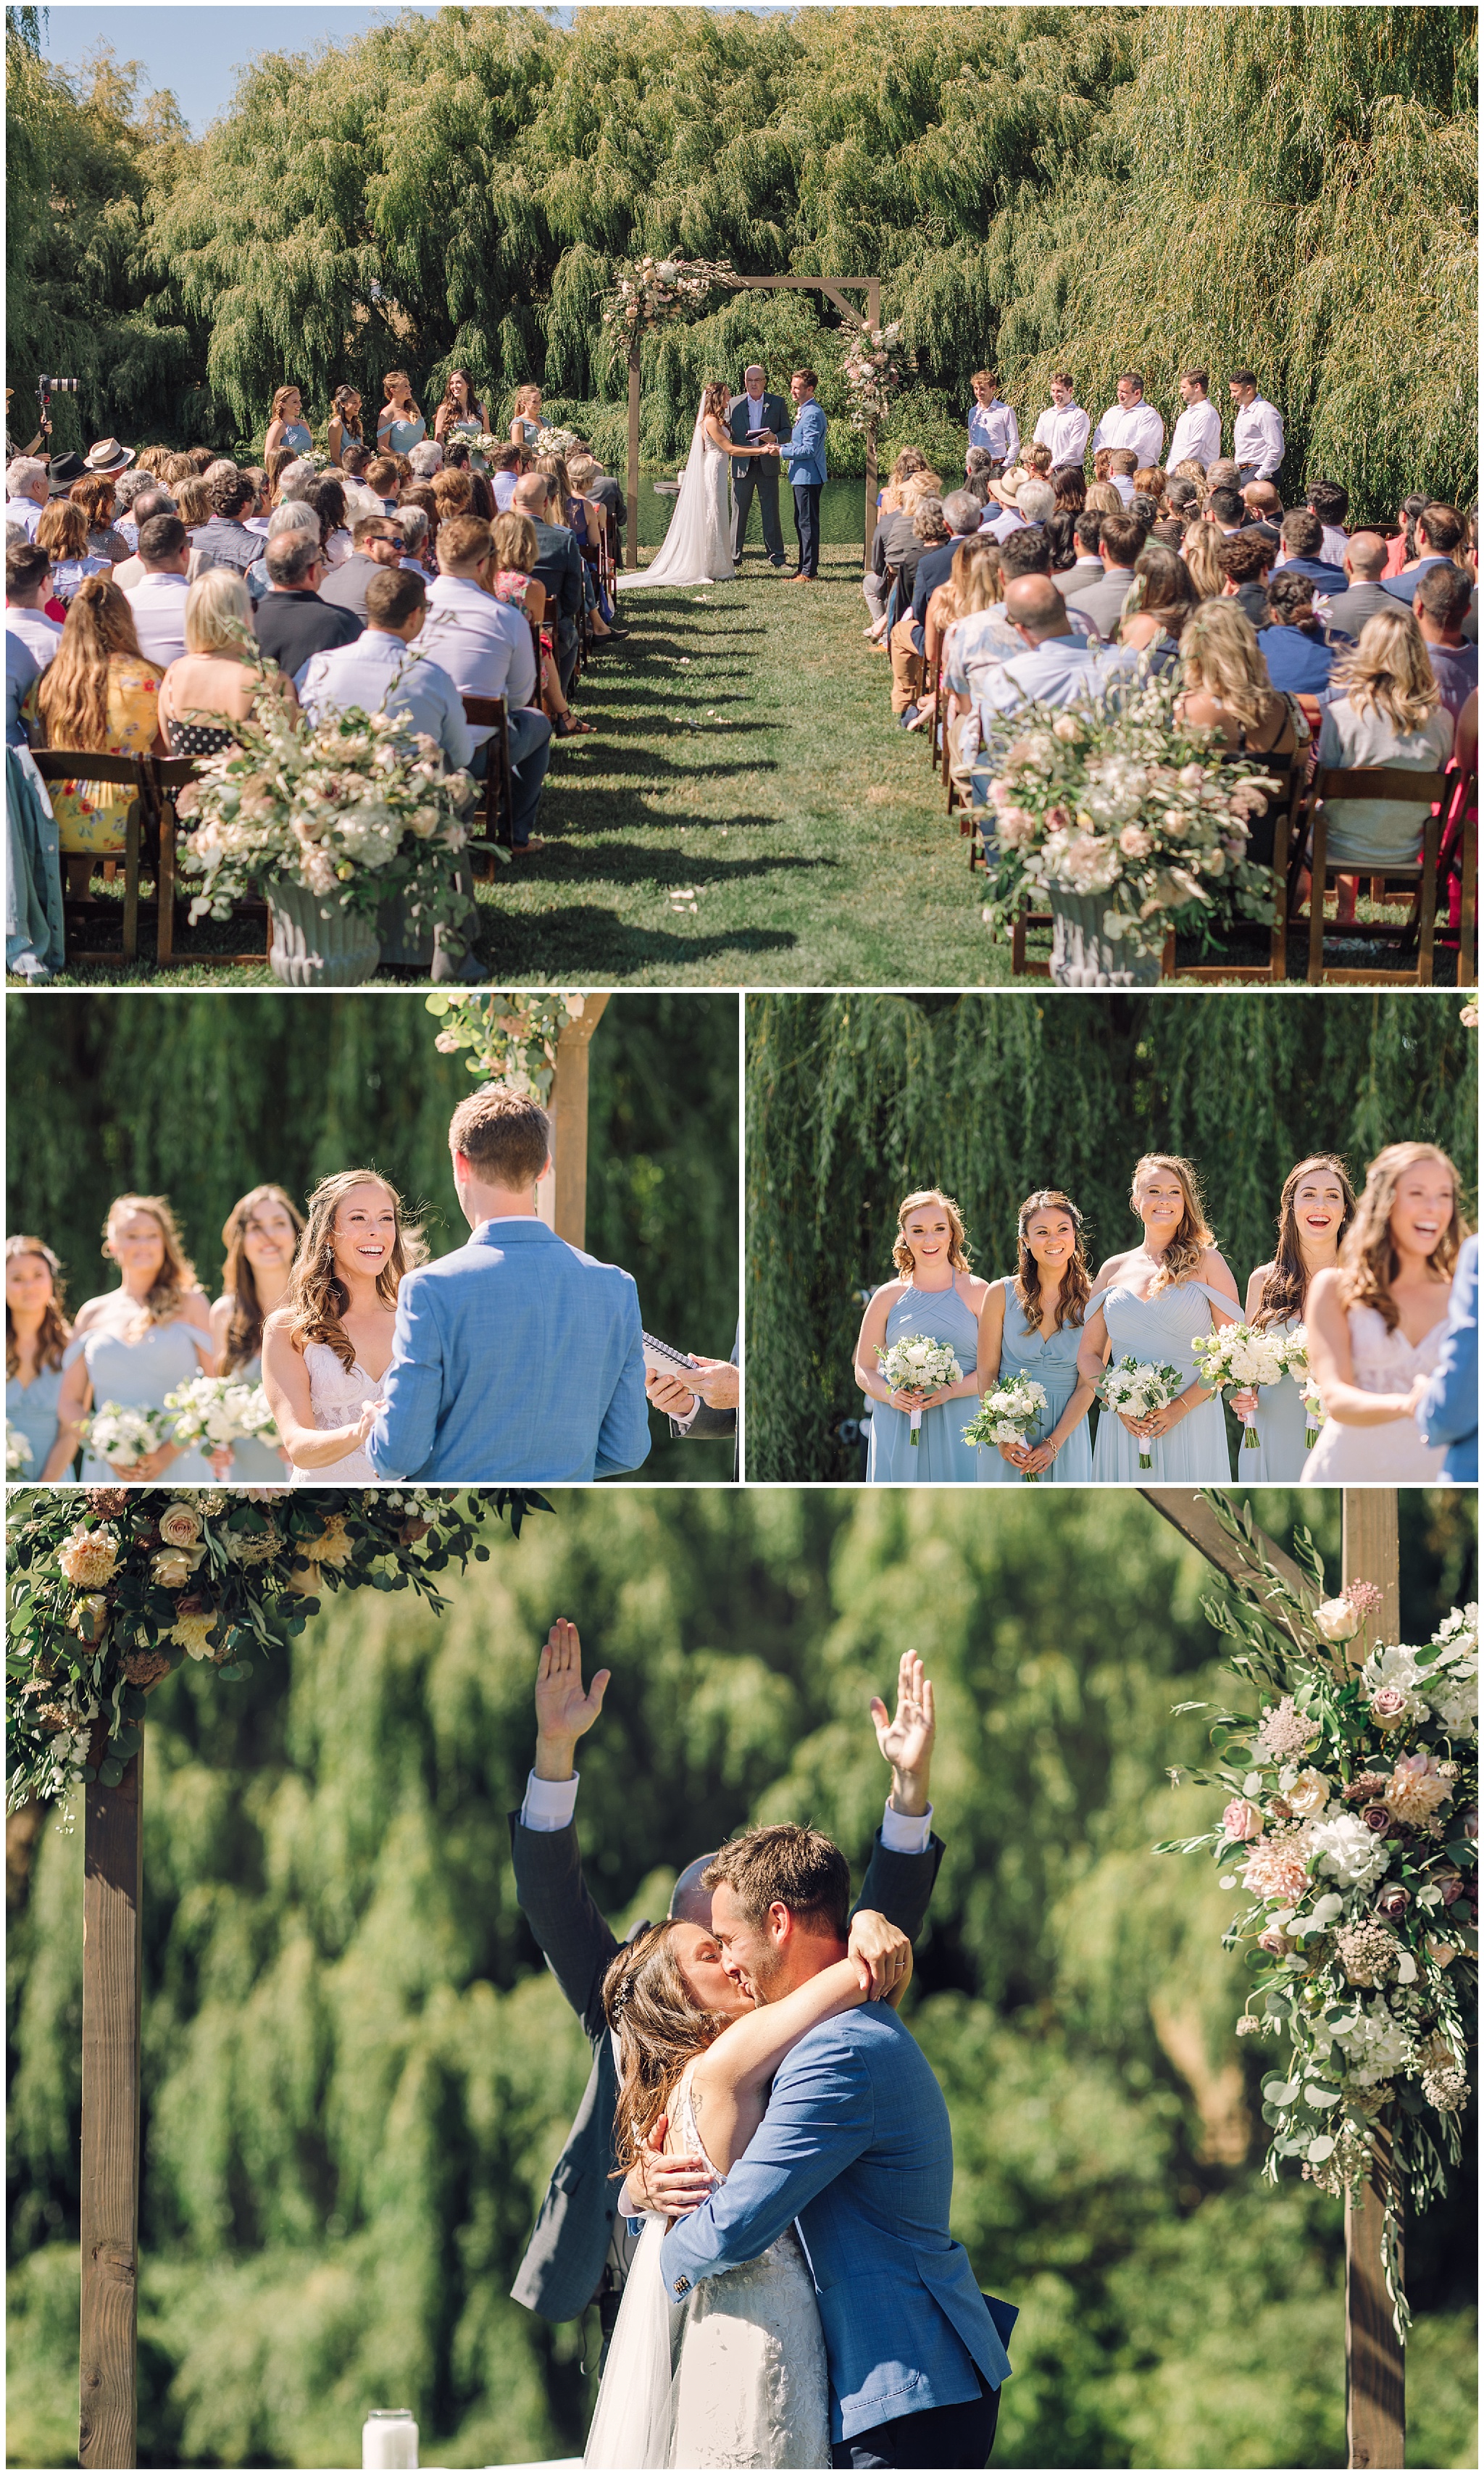 Natalie and Cory Olympia's Valley Estate Wedding | Courtney Stockton Photography